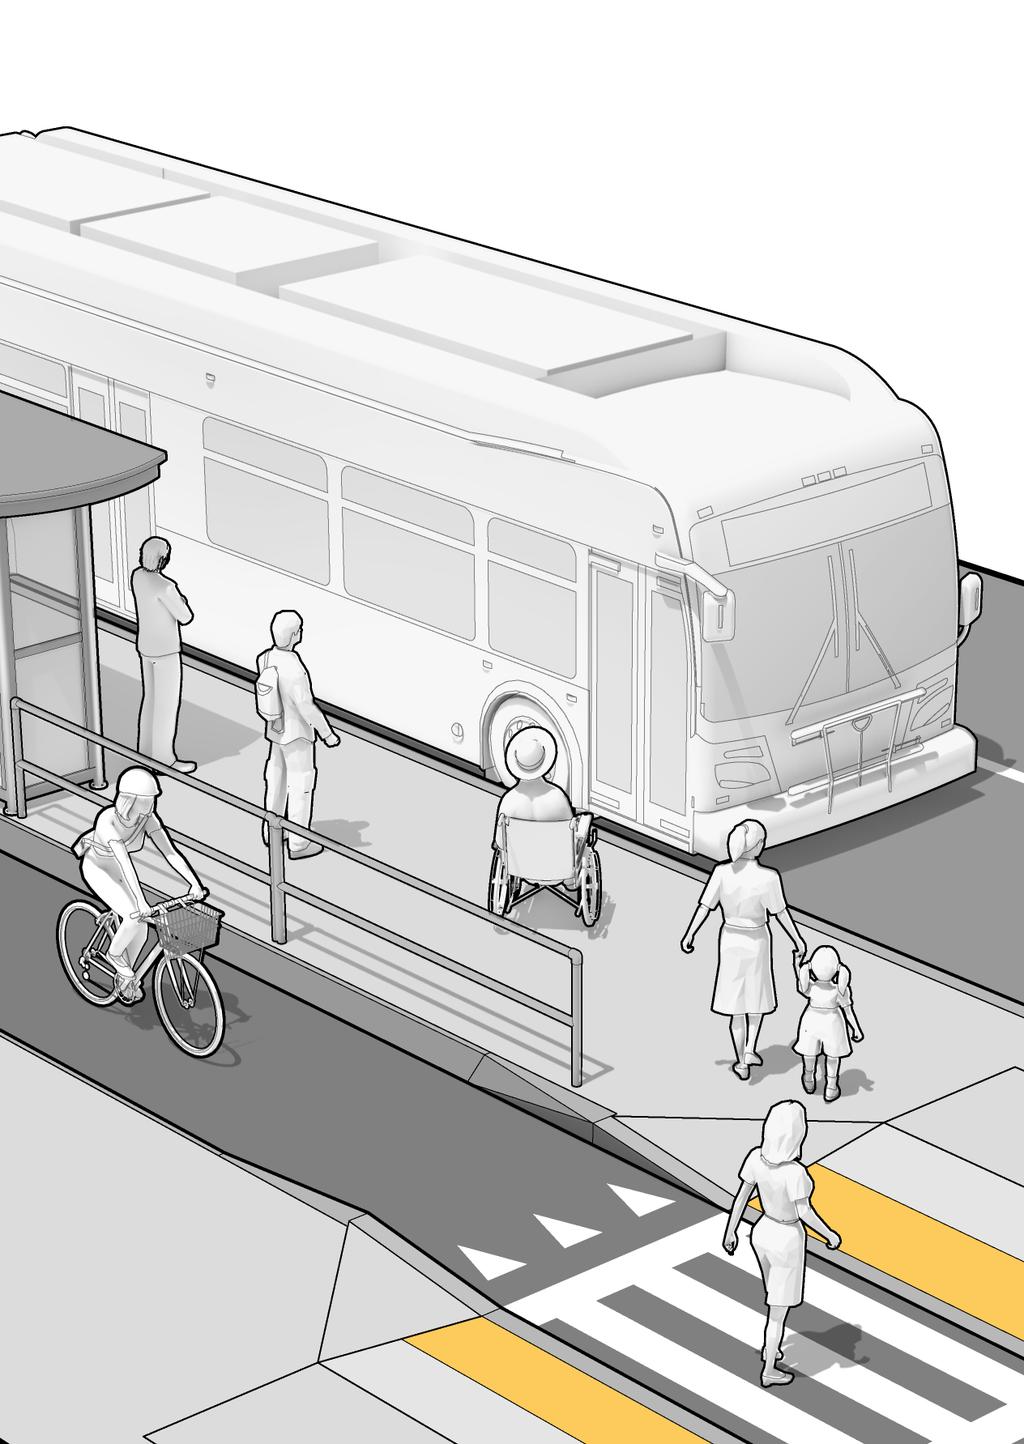 5 CURBSIDE ACTIVITY DESIGN This chapter provides design guidance for separated bike lanes adjacent to curbside activities including parking, loading and bus stops.